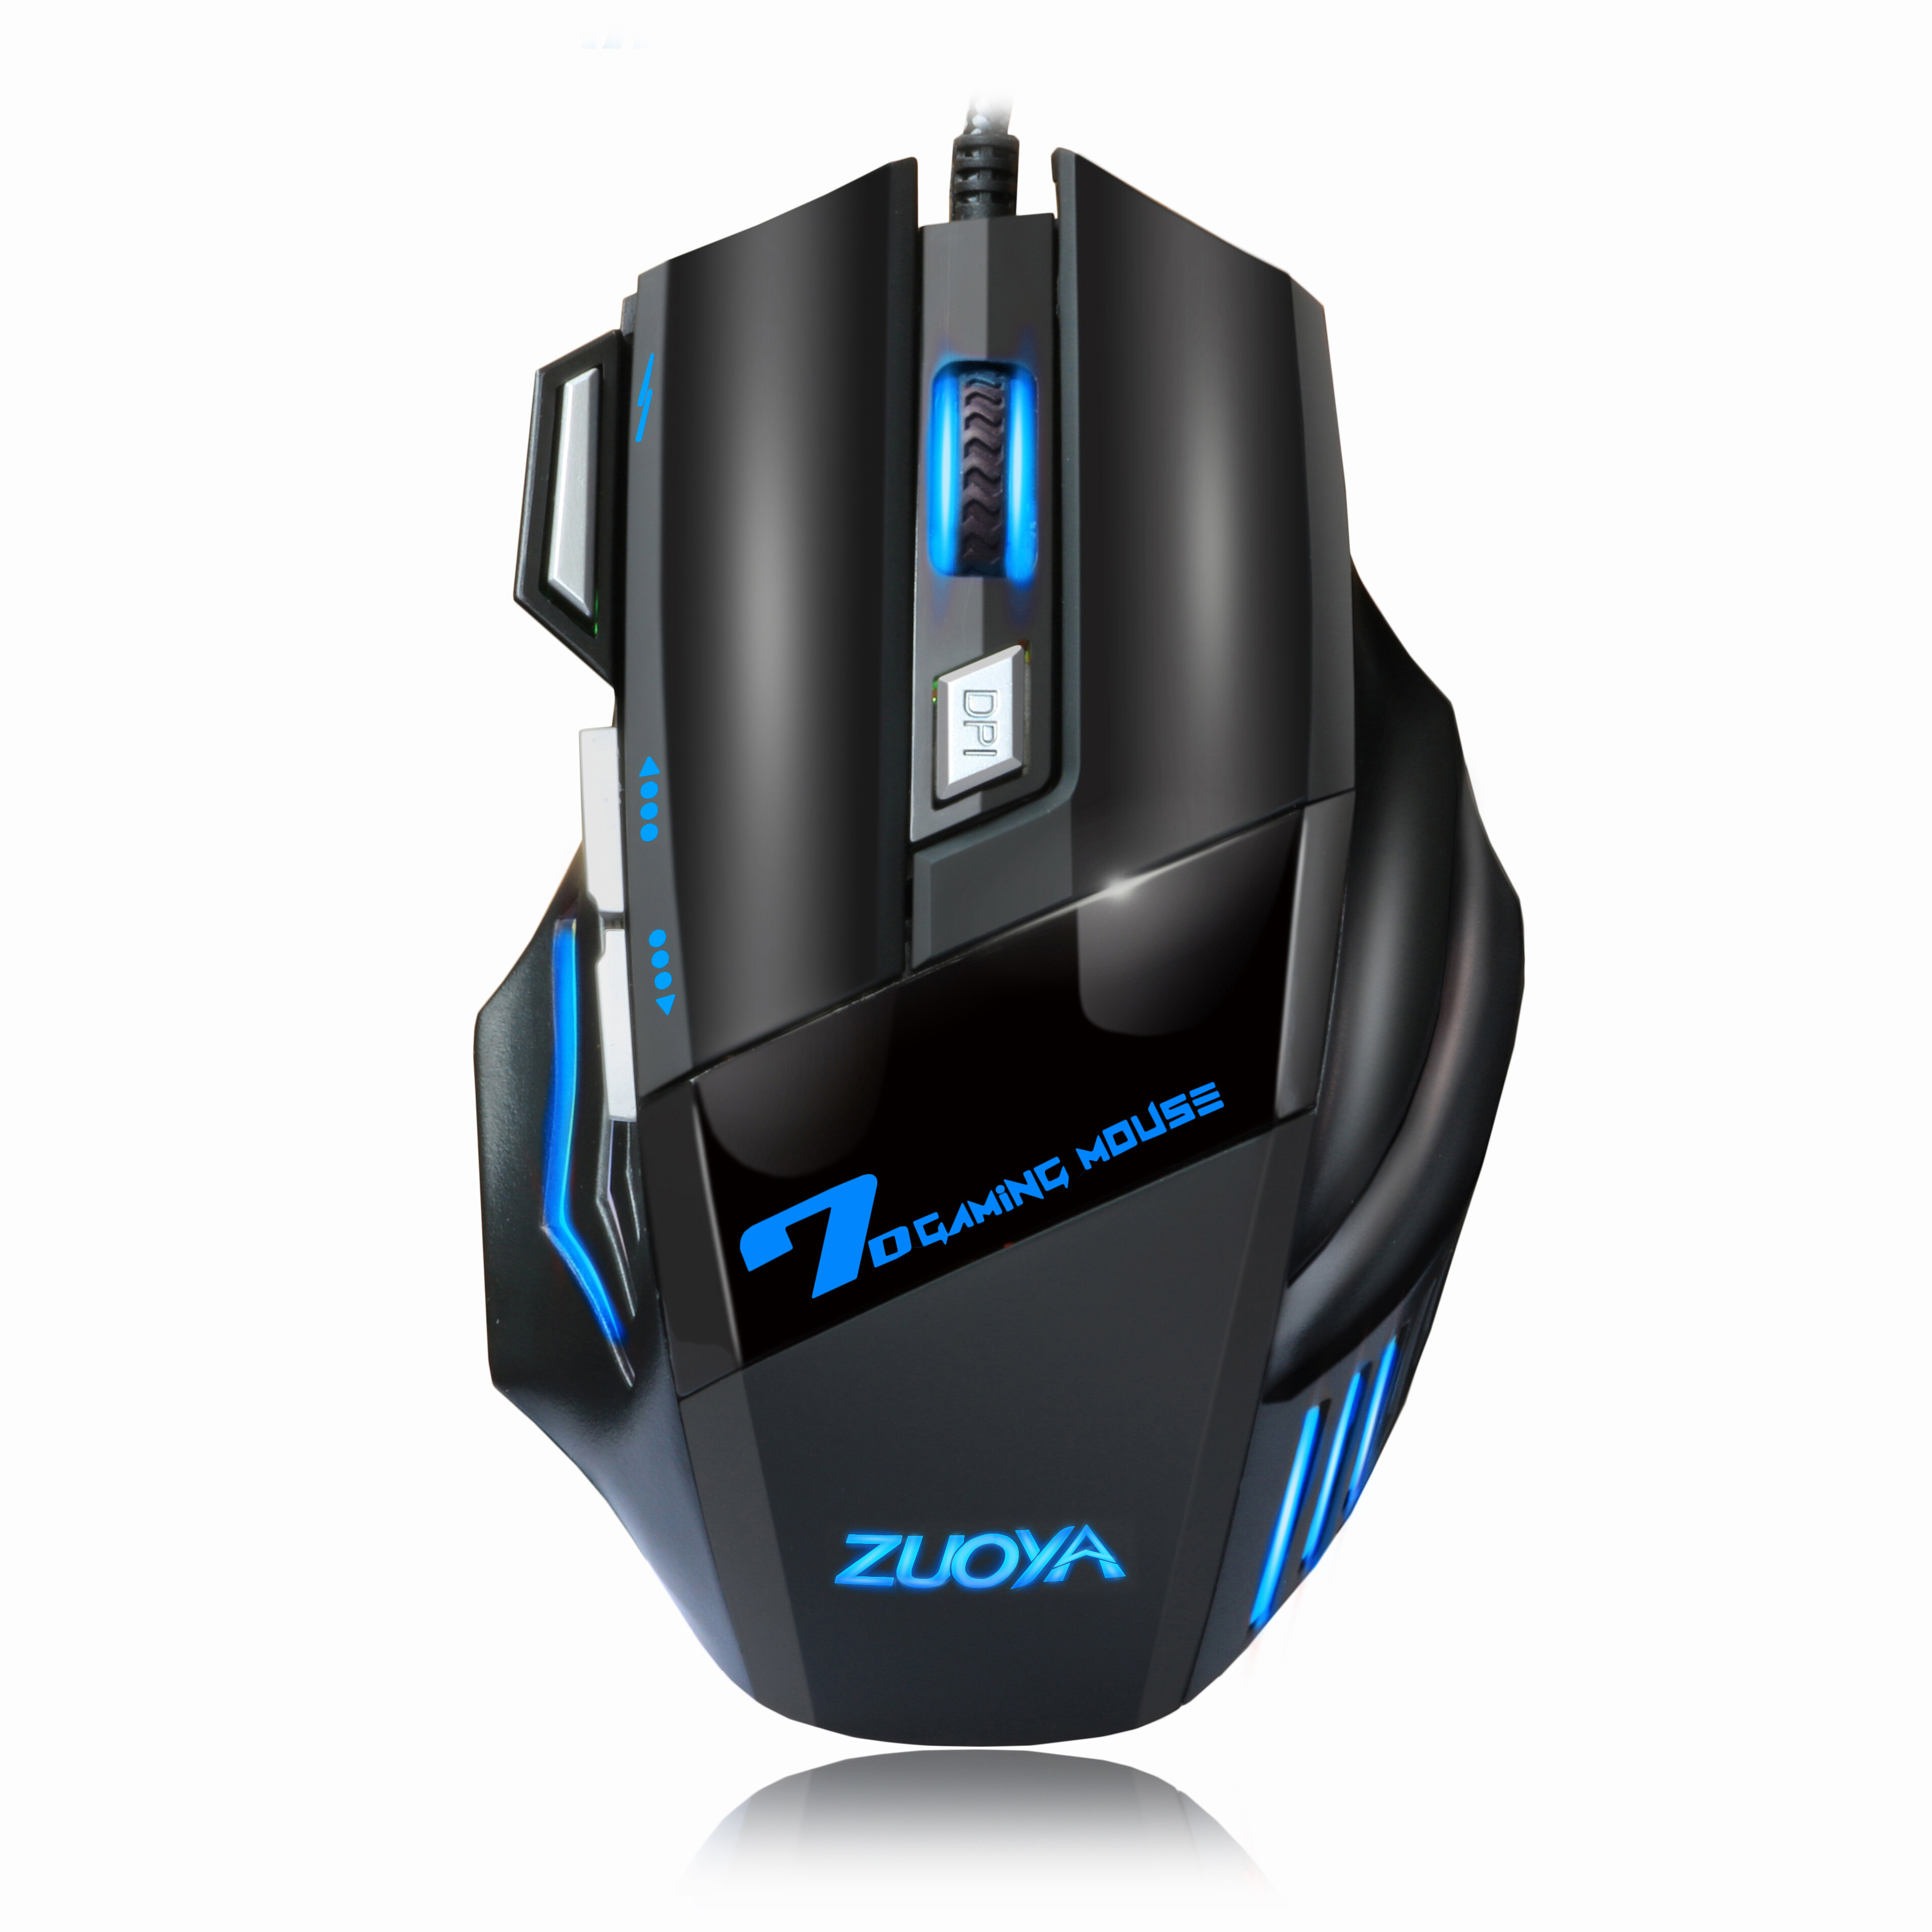 ZUOYA MMR3 Wired Mechanical Gaming Mouse 7 Keys 5500DPI LED Optical USB Mouse Mice Game Mouse Silent/Sound Mouse For PC